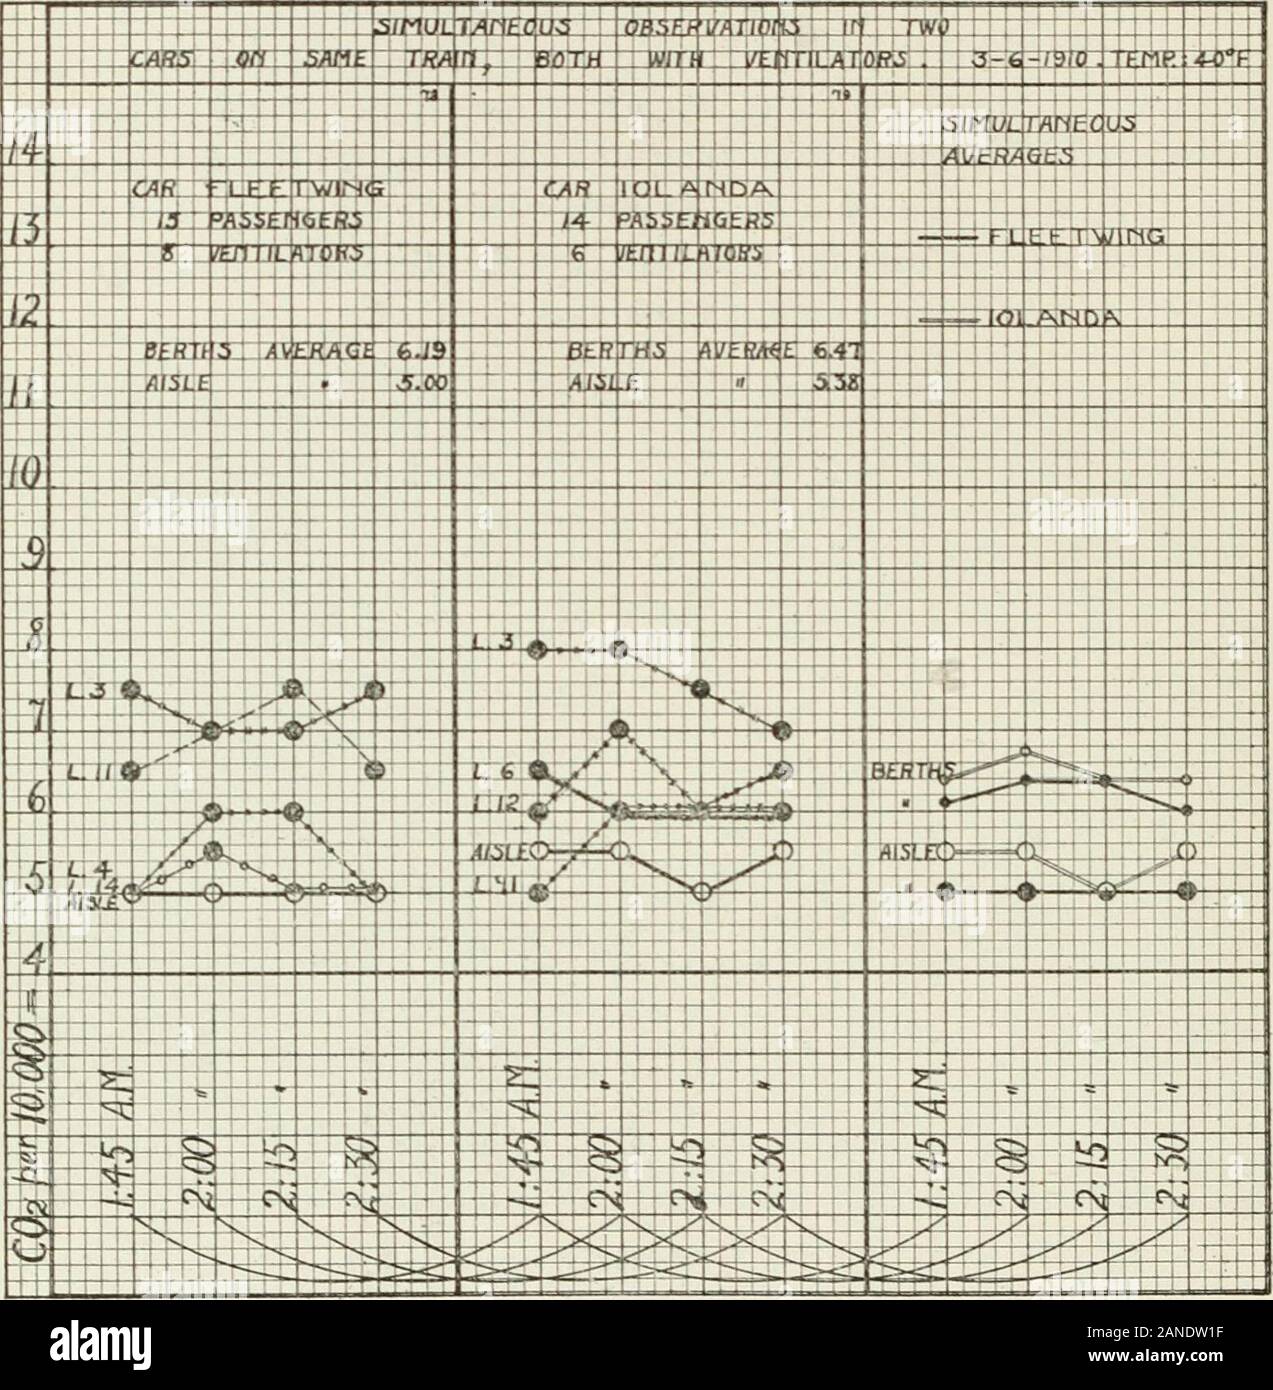 Archives of internal medicine . is seen that the average carbon dioxid for both berthsand aisles of the two cars show only a fractional difference. If we bring into comparison the conditions of the two classes of cars,those without and those with the exhaust ventilators, a decided advantageis seen to lie with the latter in the study of berth conditions, as was beforenoted in the study of air from the car body. This comparison is graphic-ally represented for the general averages of the lower berths and the aislesin Chart 9, and an equivalent for the upper berths of all the ears repre- 114 TEE A Stock Photo